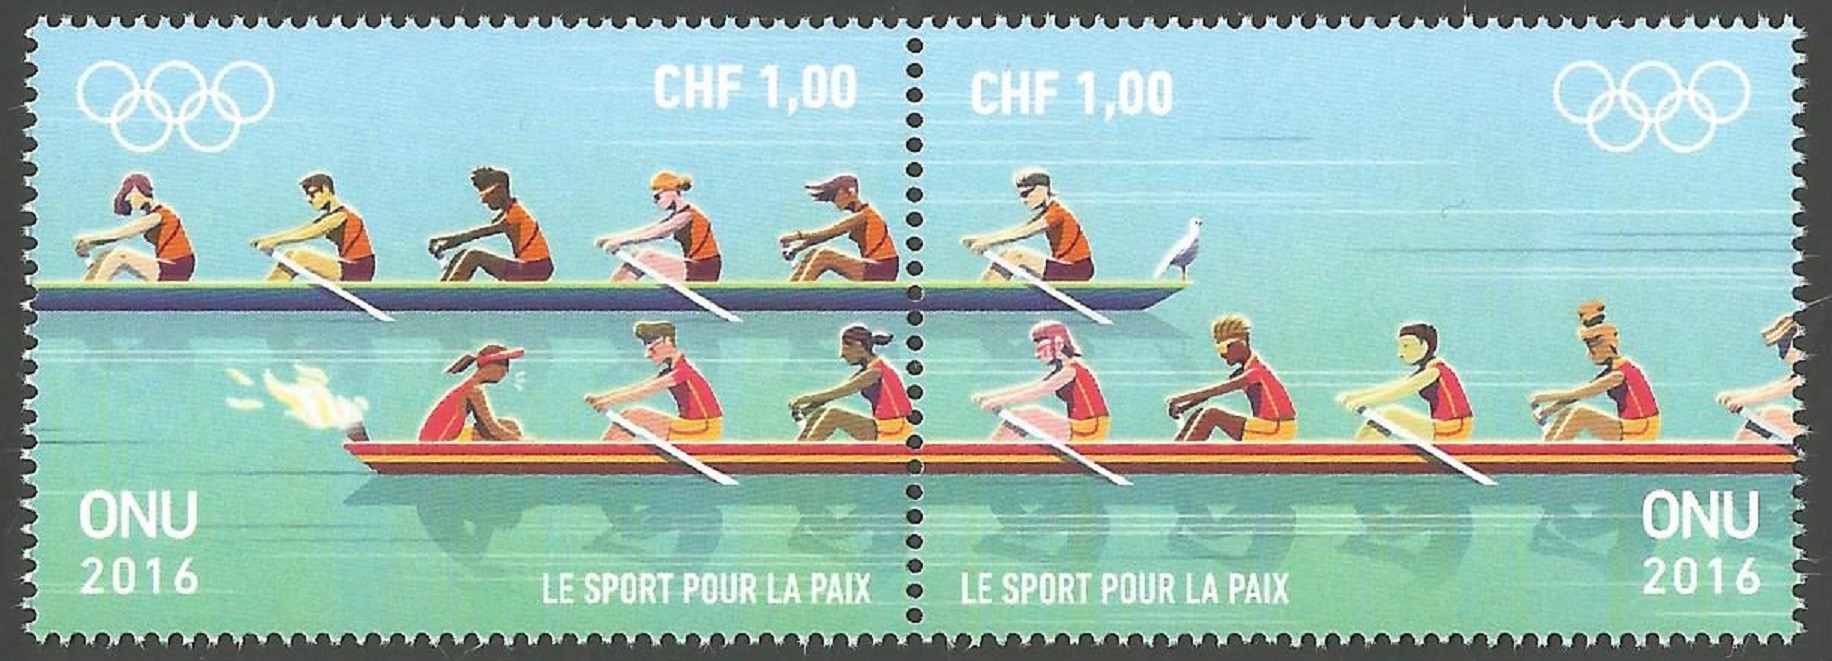 Stamp UNO Geneva 2016 July 22nd Sport for Peace